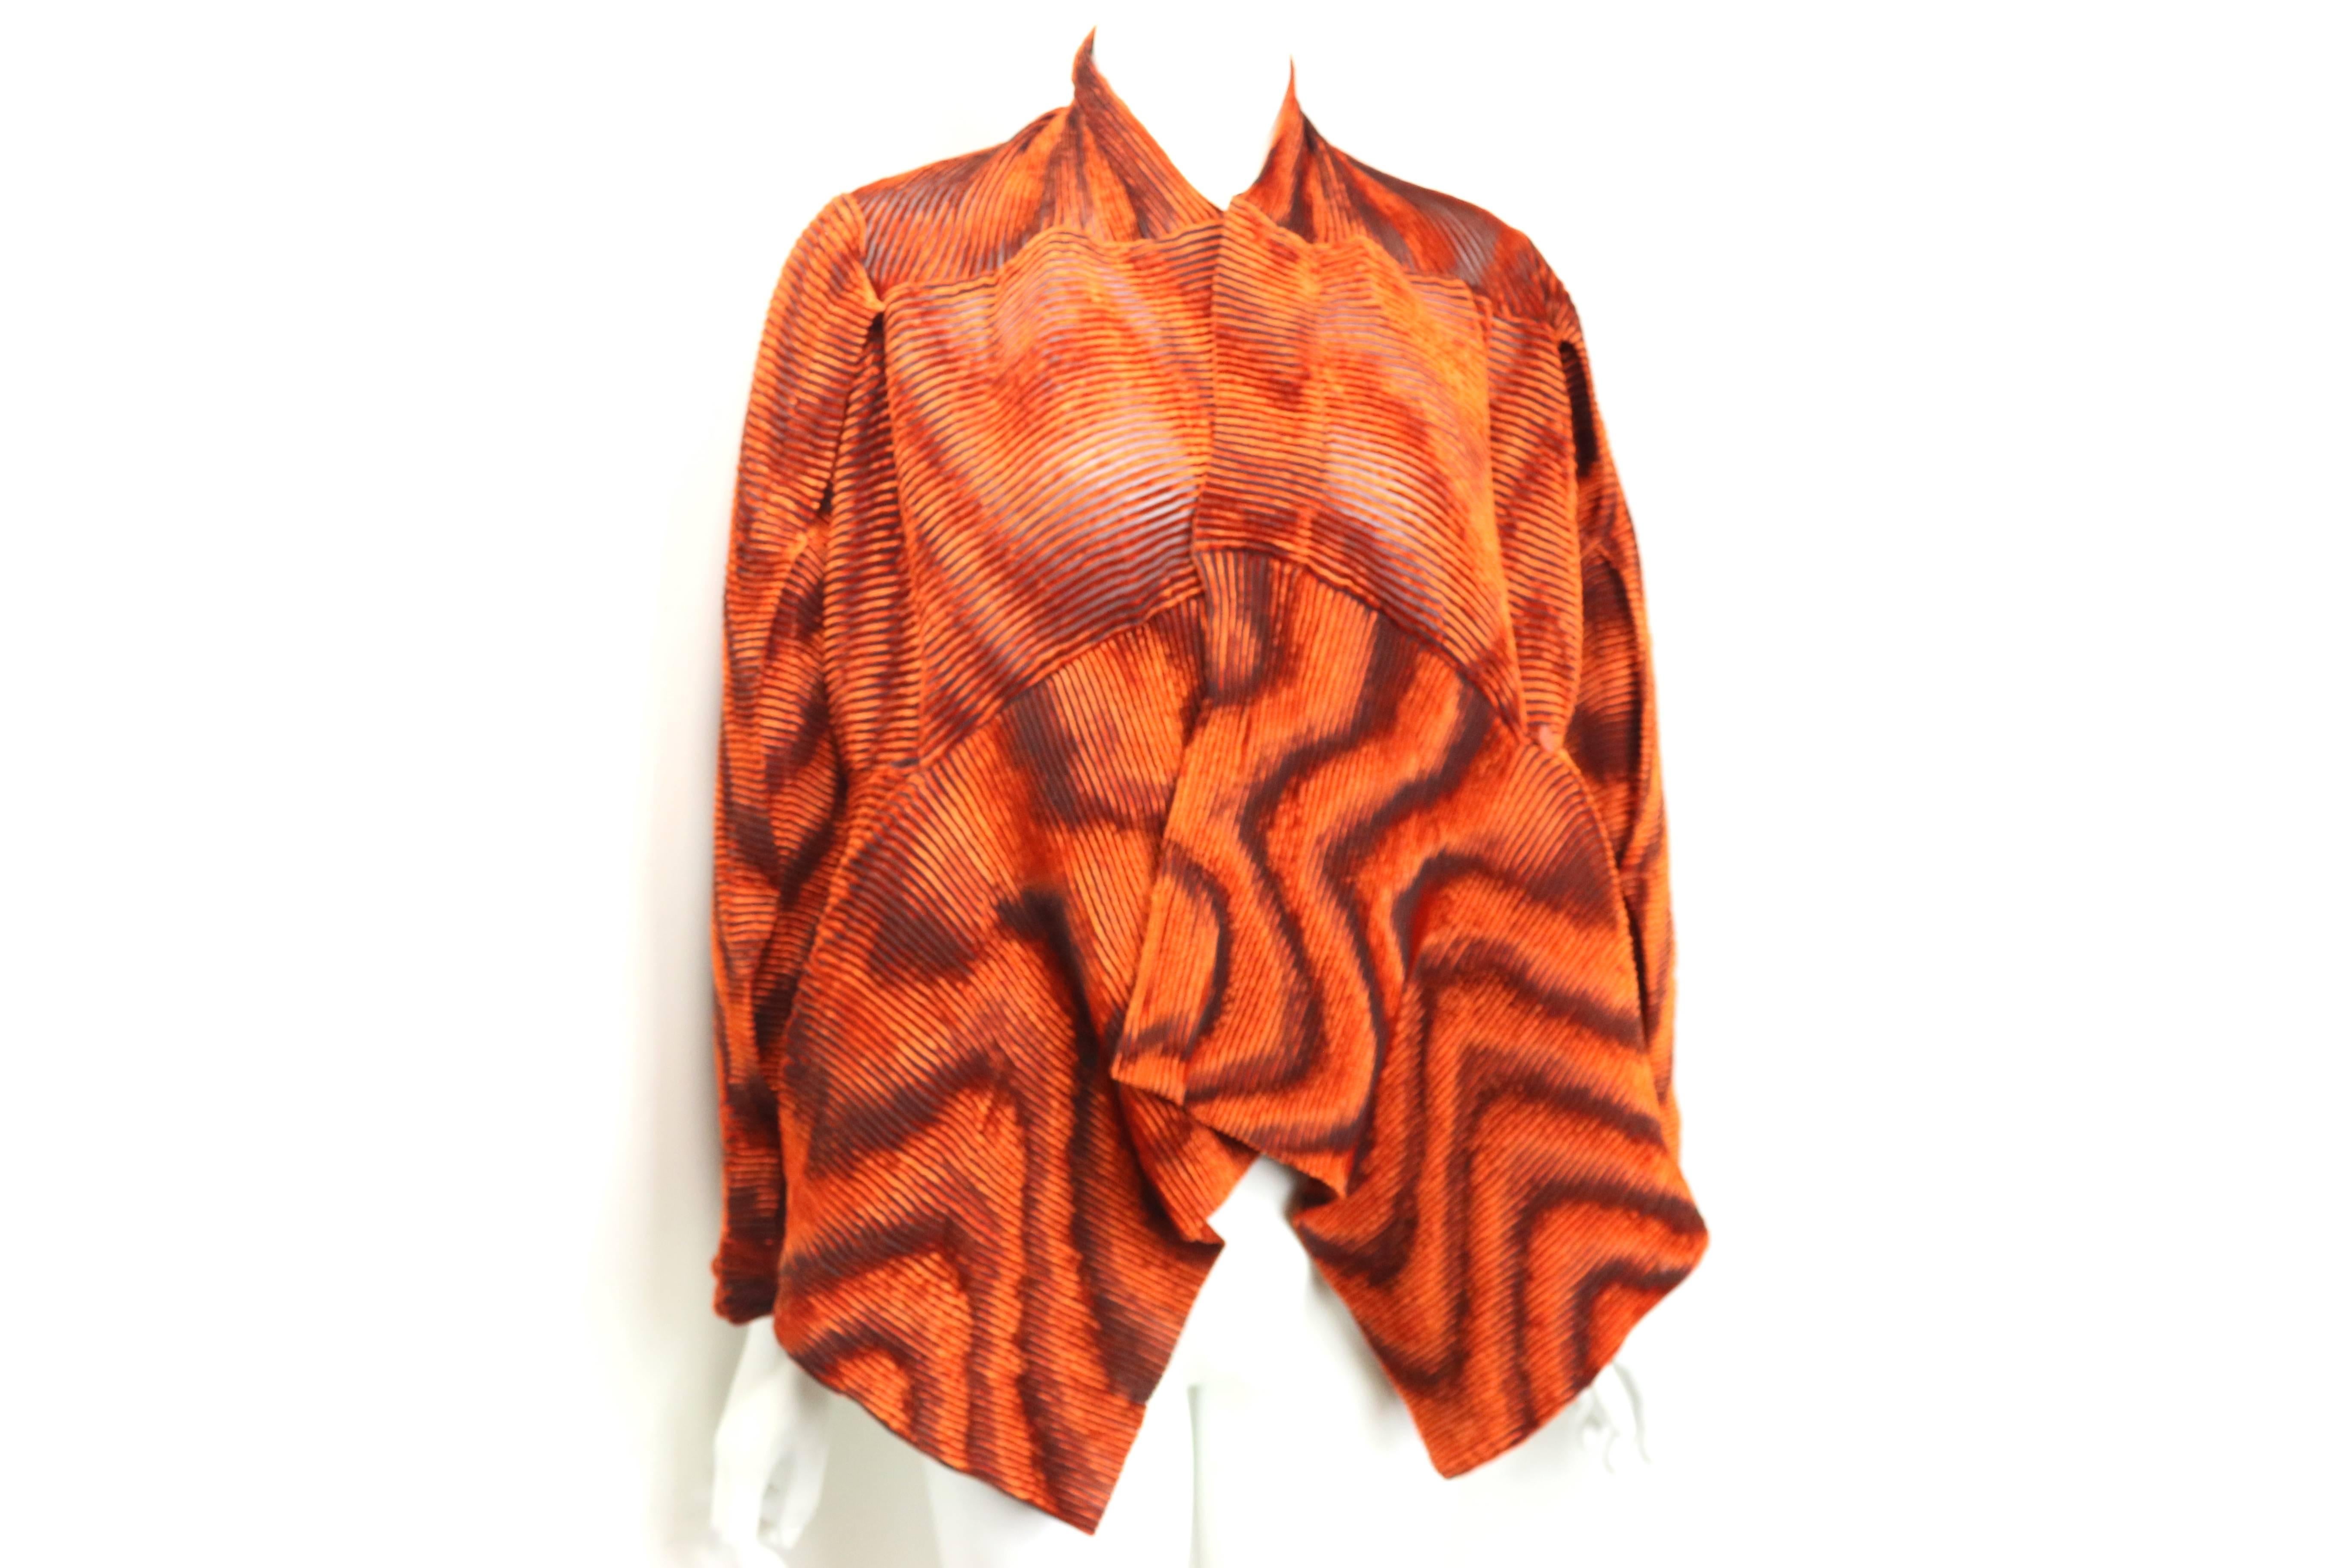 - Vintage 90s Issey Miyake orange velvet plasma wave pleated bolero jacket.

- Top can be styled in various ways dues to its elasticity.  

- Four shoulder slits for different styling of the jacket. 

- Small button closure. 

- Size Small.

- 50%